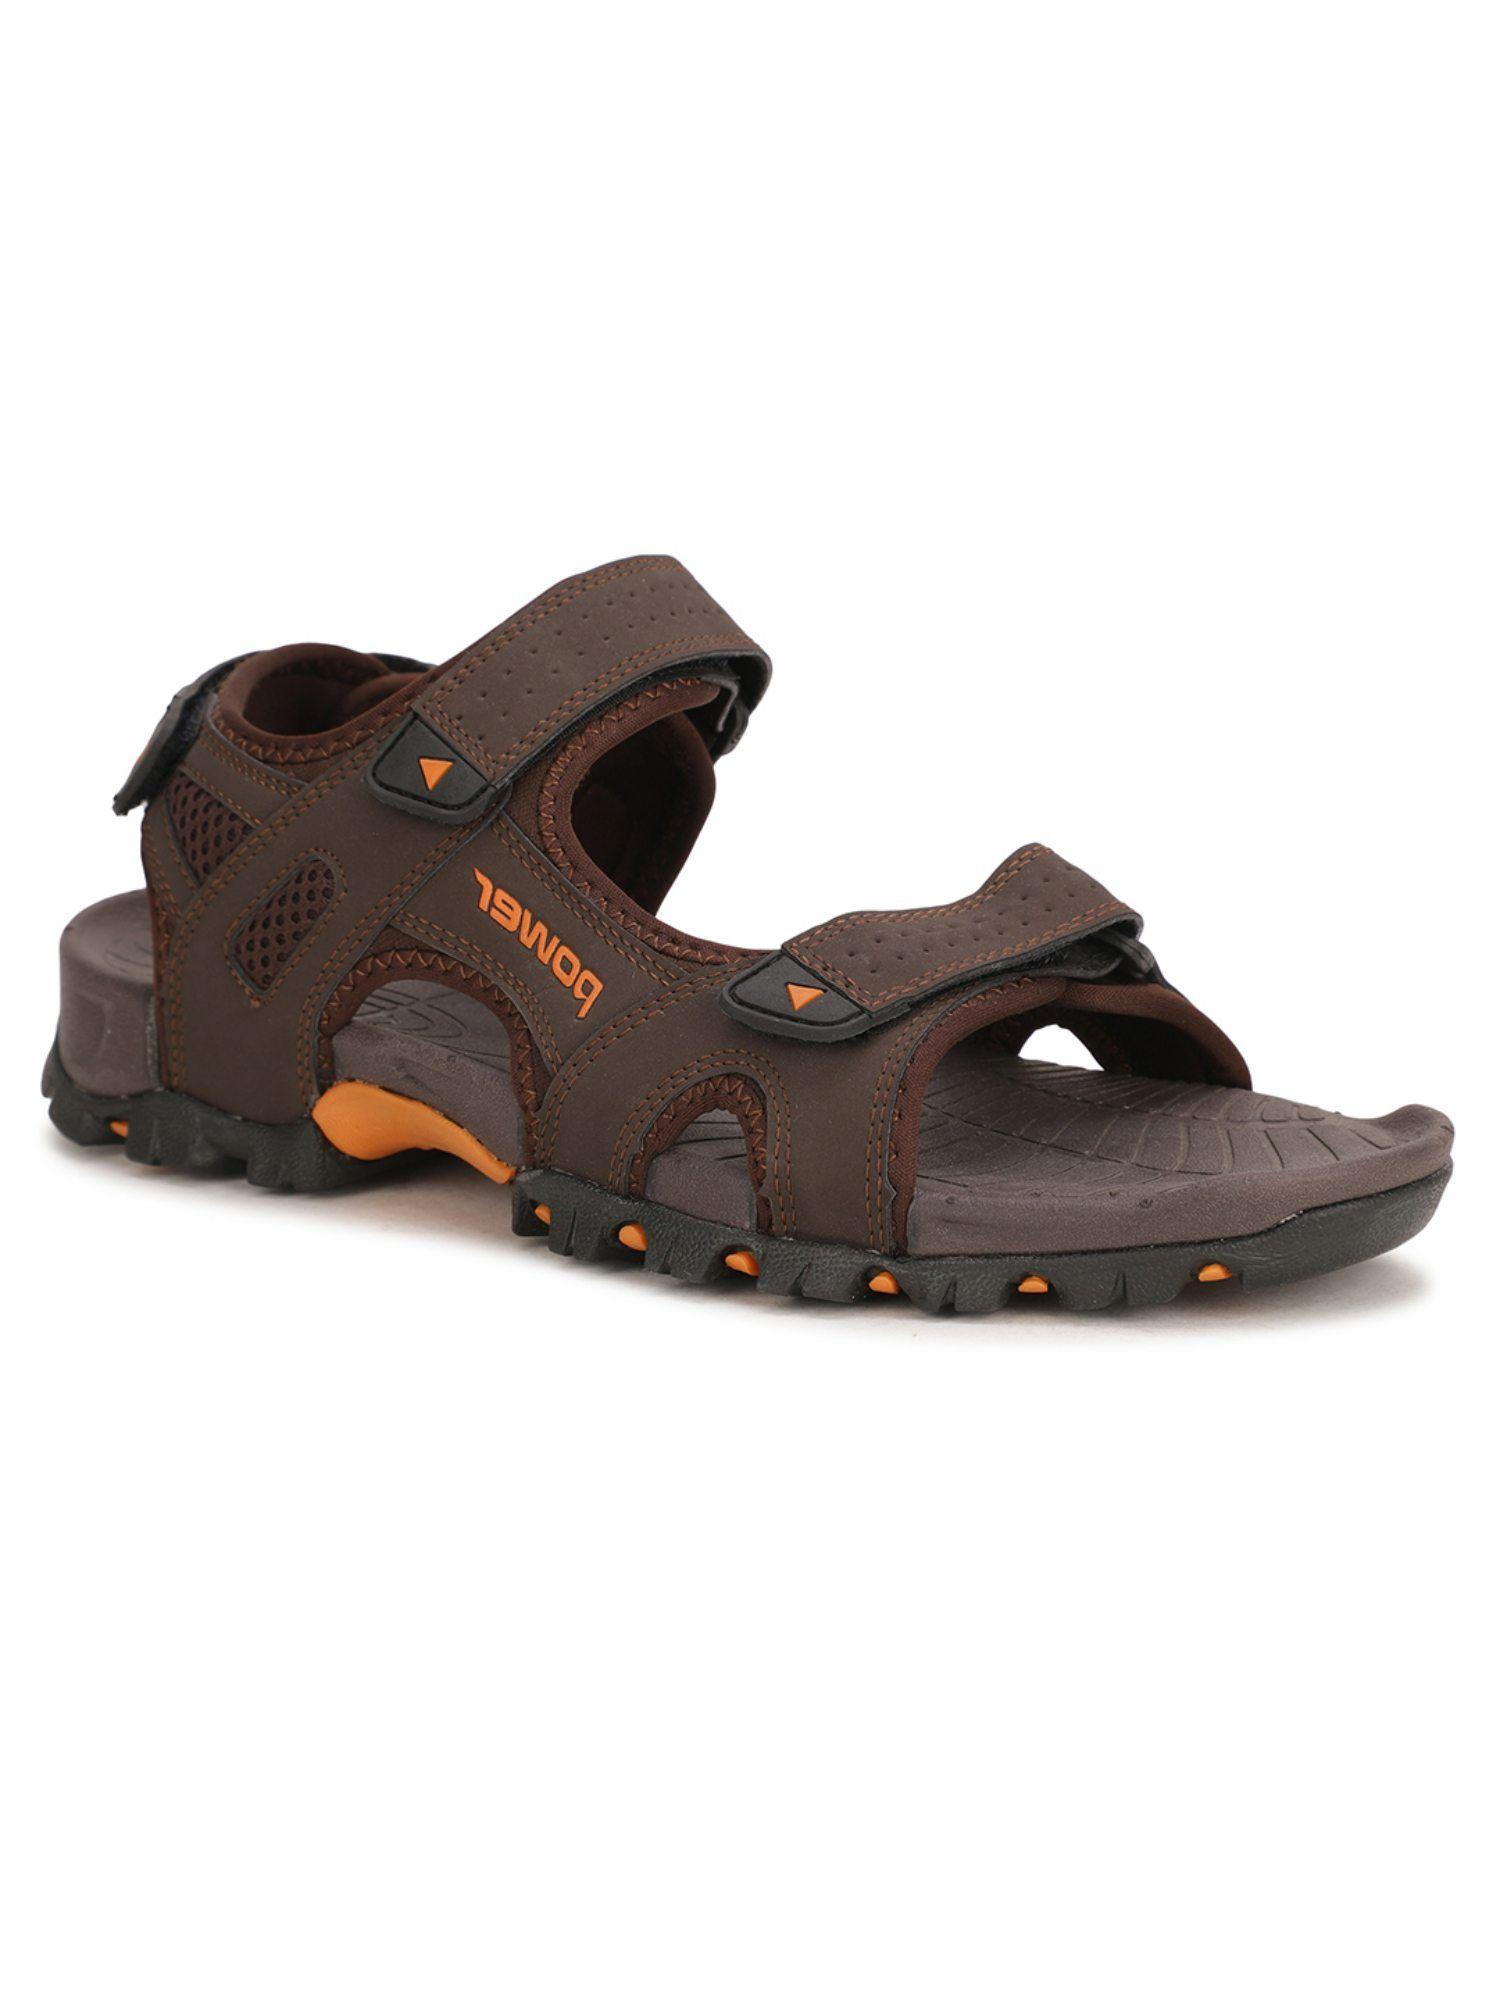 solid brown sports sandals